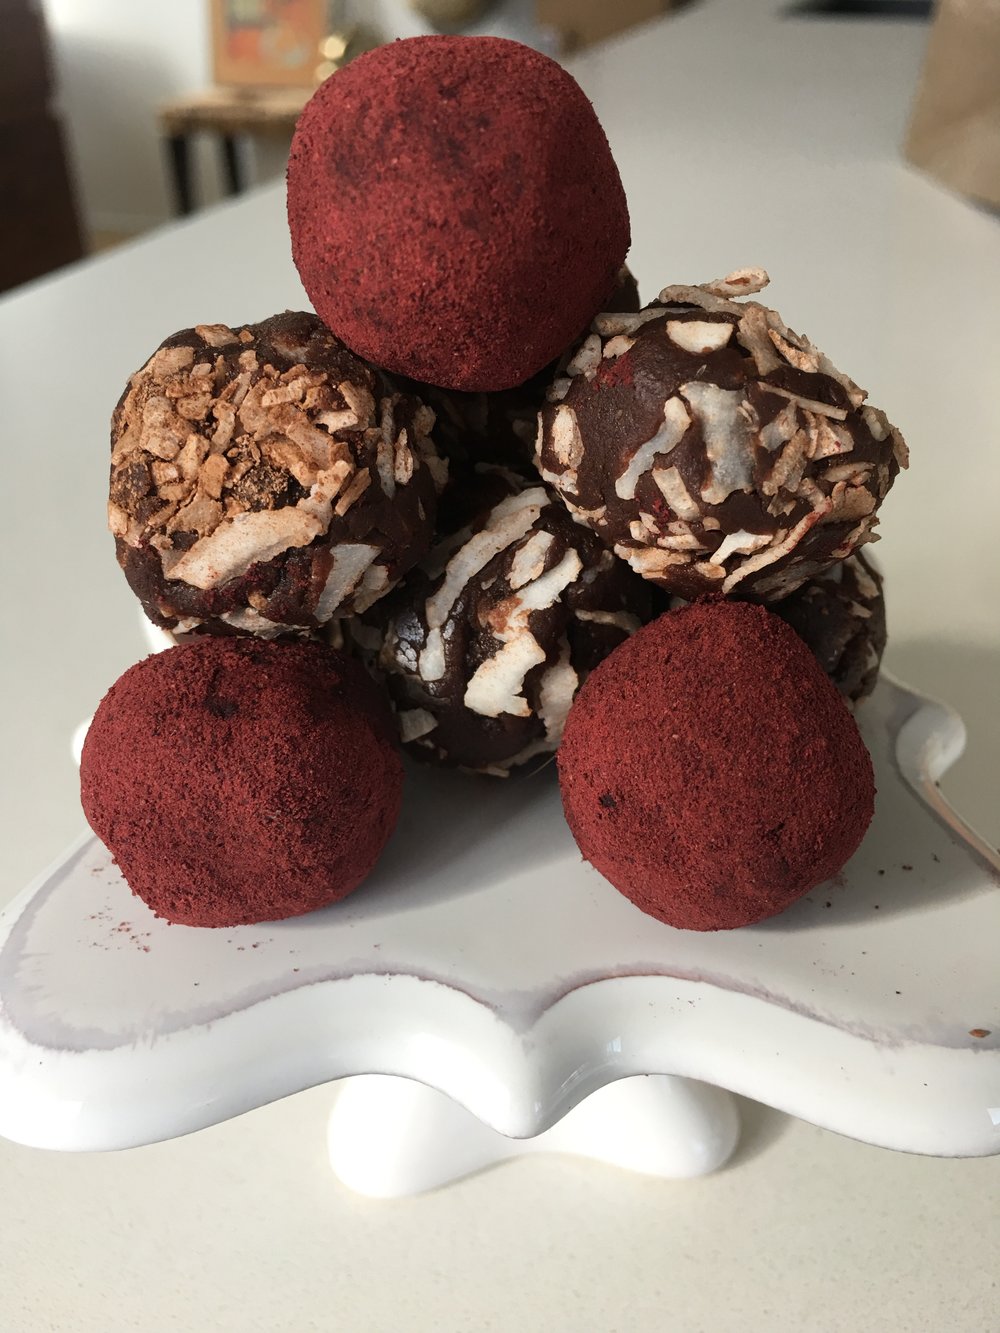 Nutrition Atlanta Cacao Protein Balls (coated in organic beet powder and organic shredded coconut)